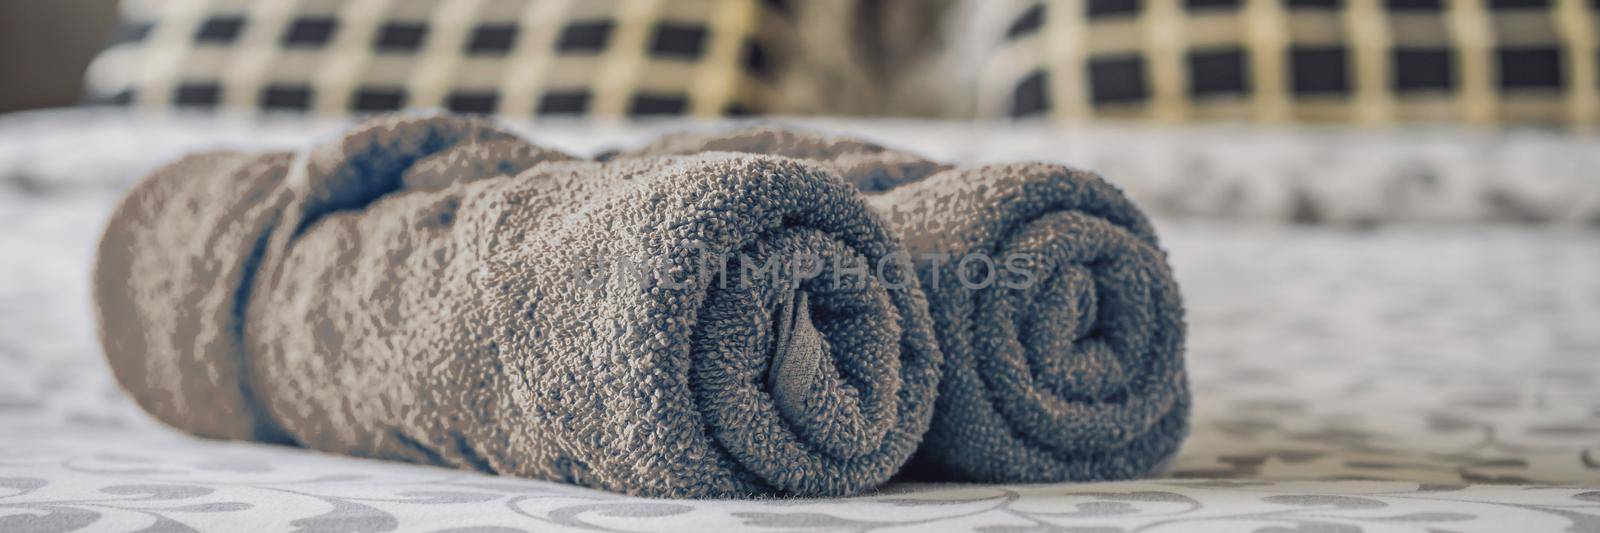 Freshly laundered fluffy towels on bed in hotel. BANNER, LONG FORMAT